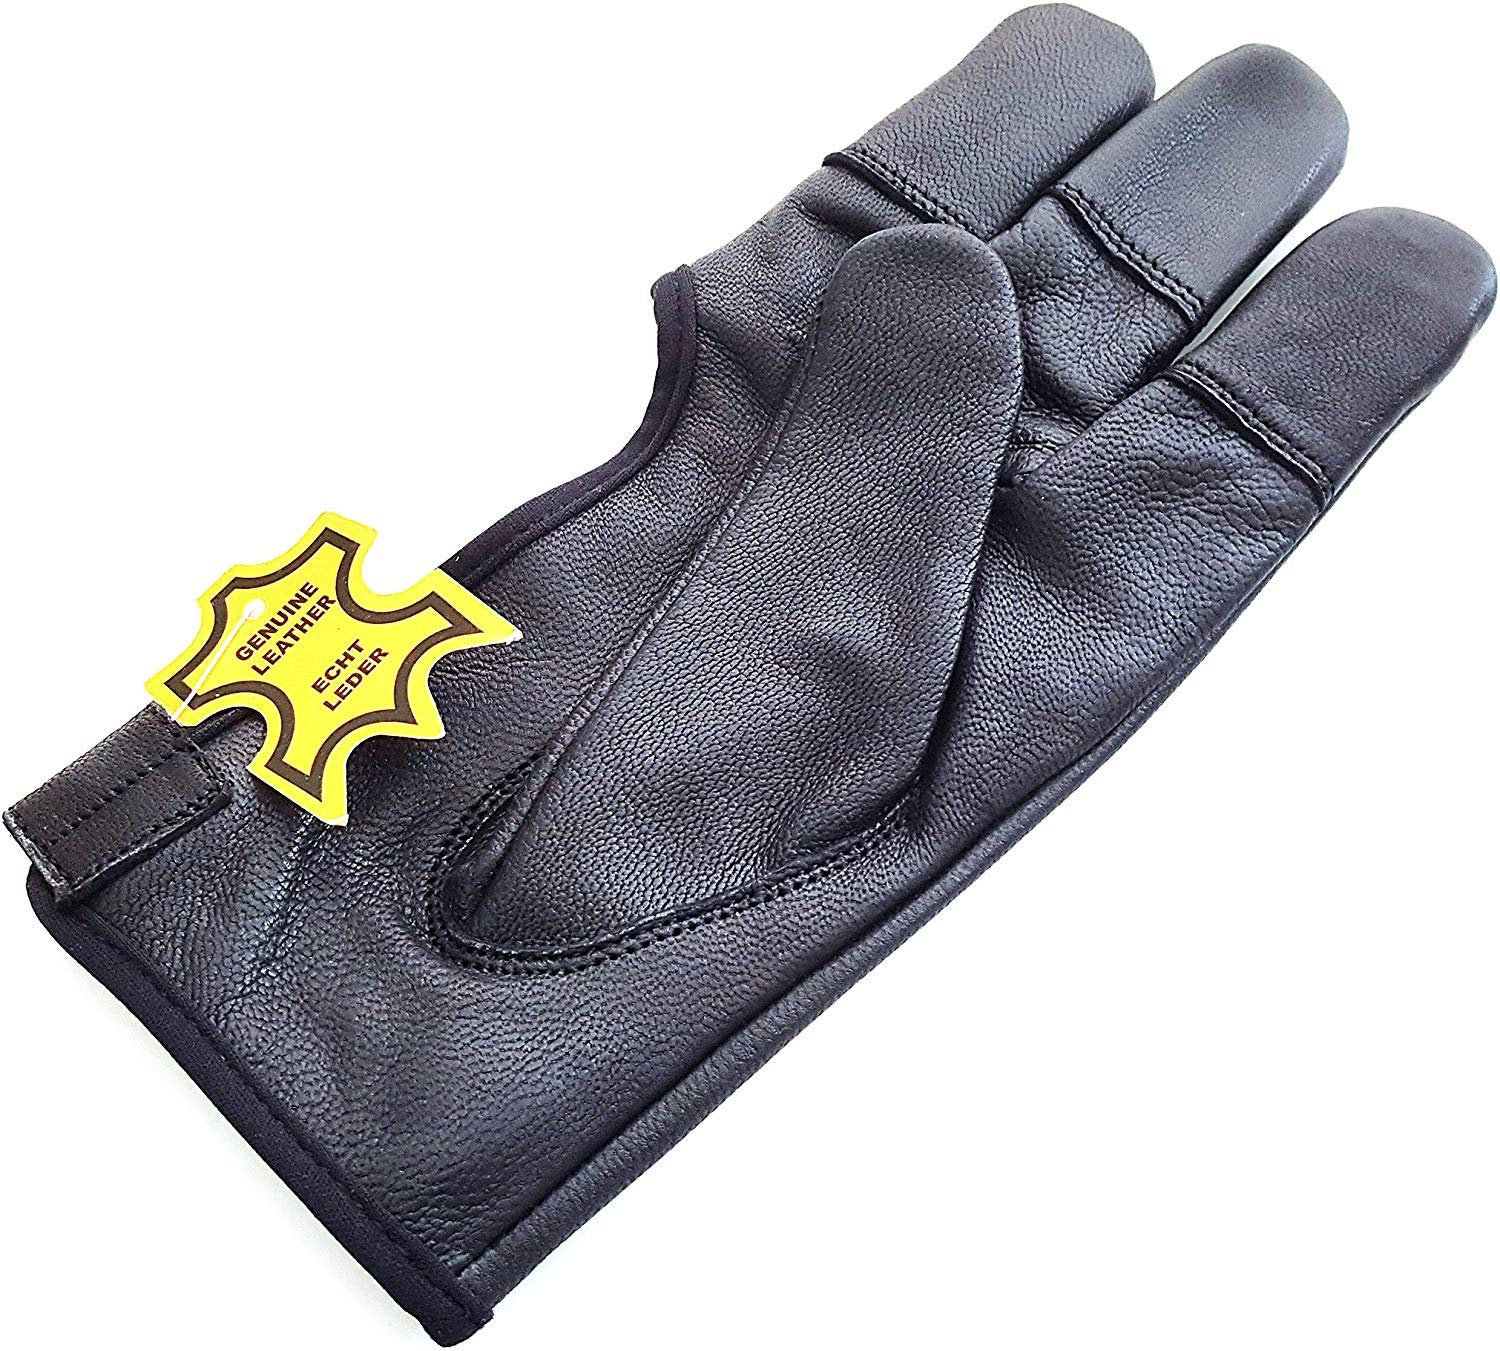 ARCHERS REAL LEATHER SHOOTING 4 FINGER GLOVE BLACK & CHOCOLATE BROWN 